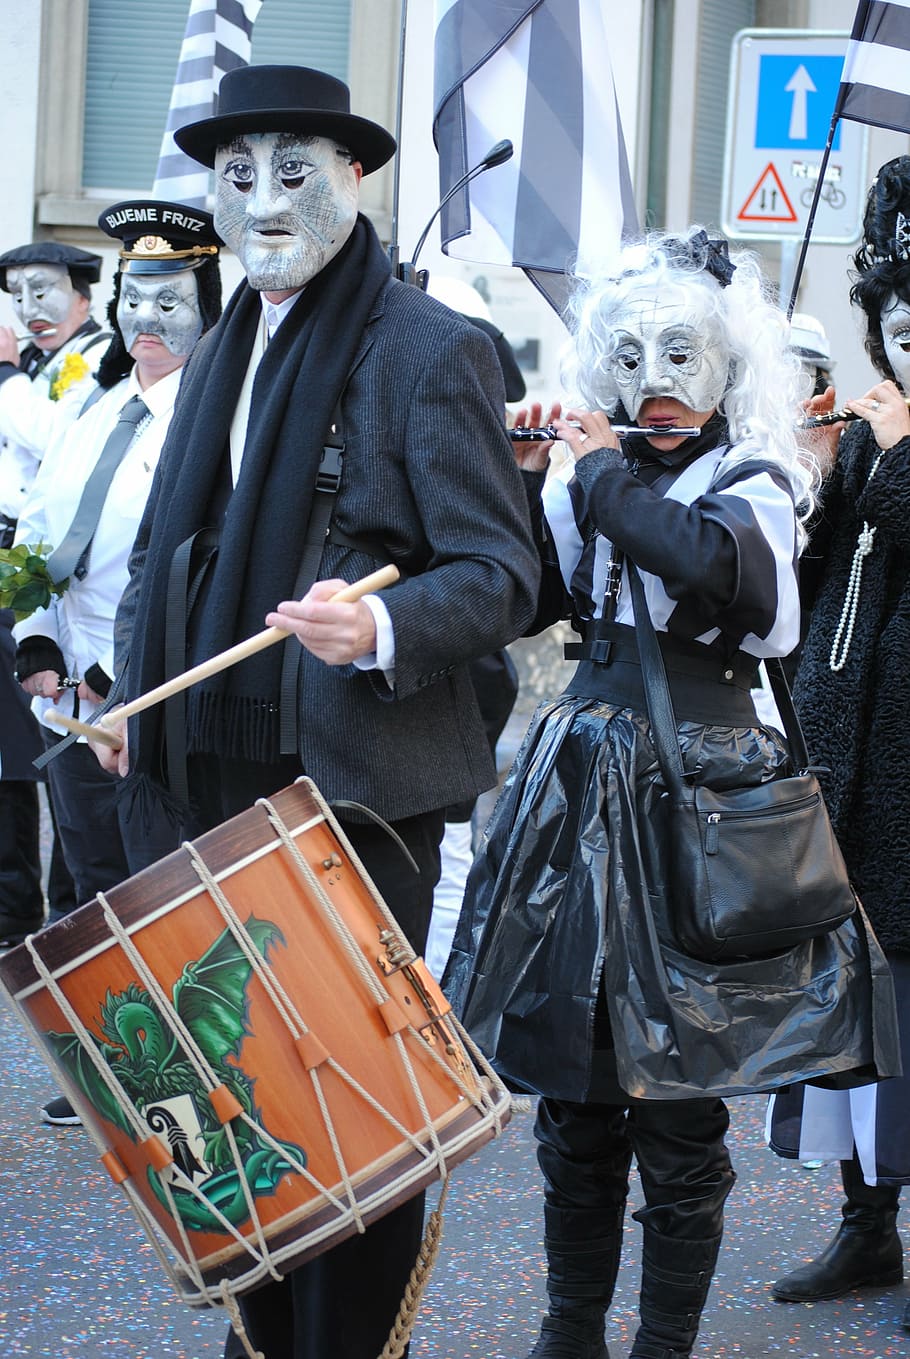 masks, tambour, whistler, piccolo, carnival, basler fasnacht 2015, real people, celebration, men, day